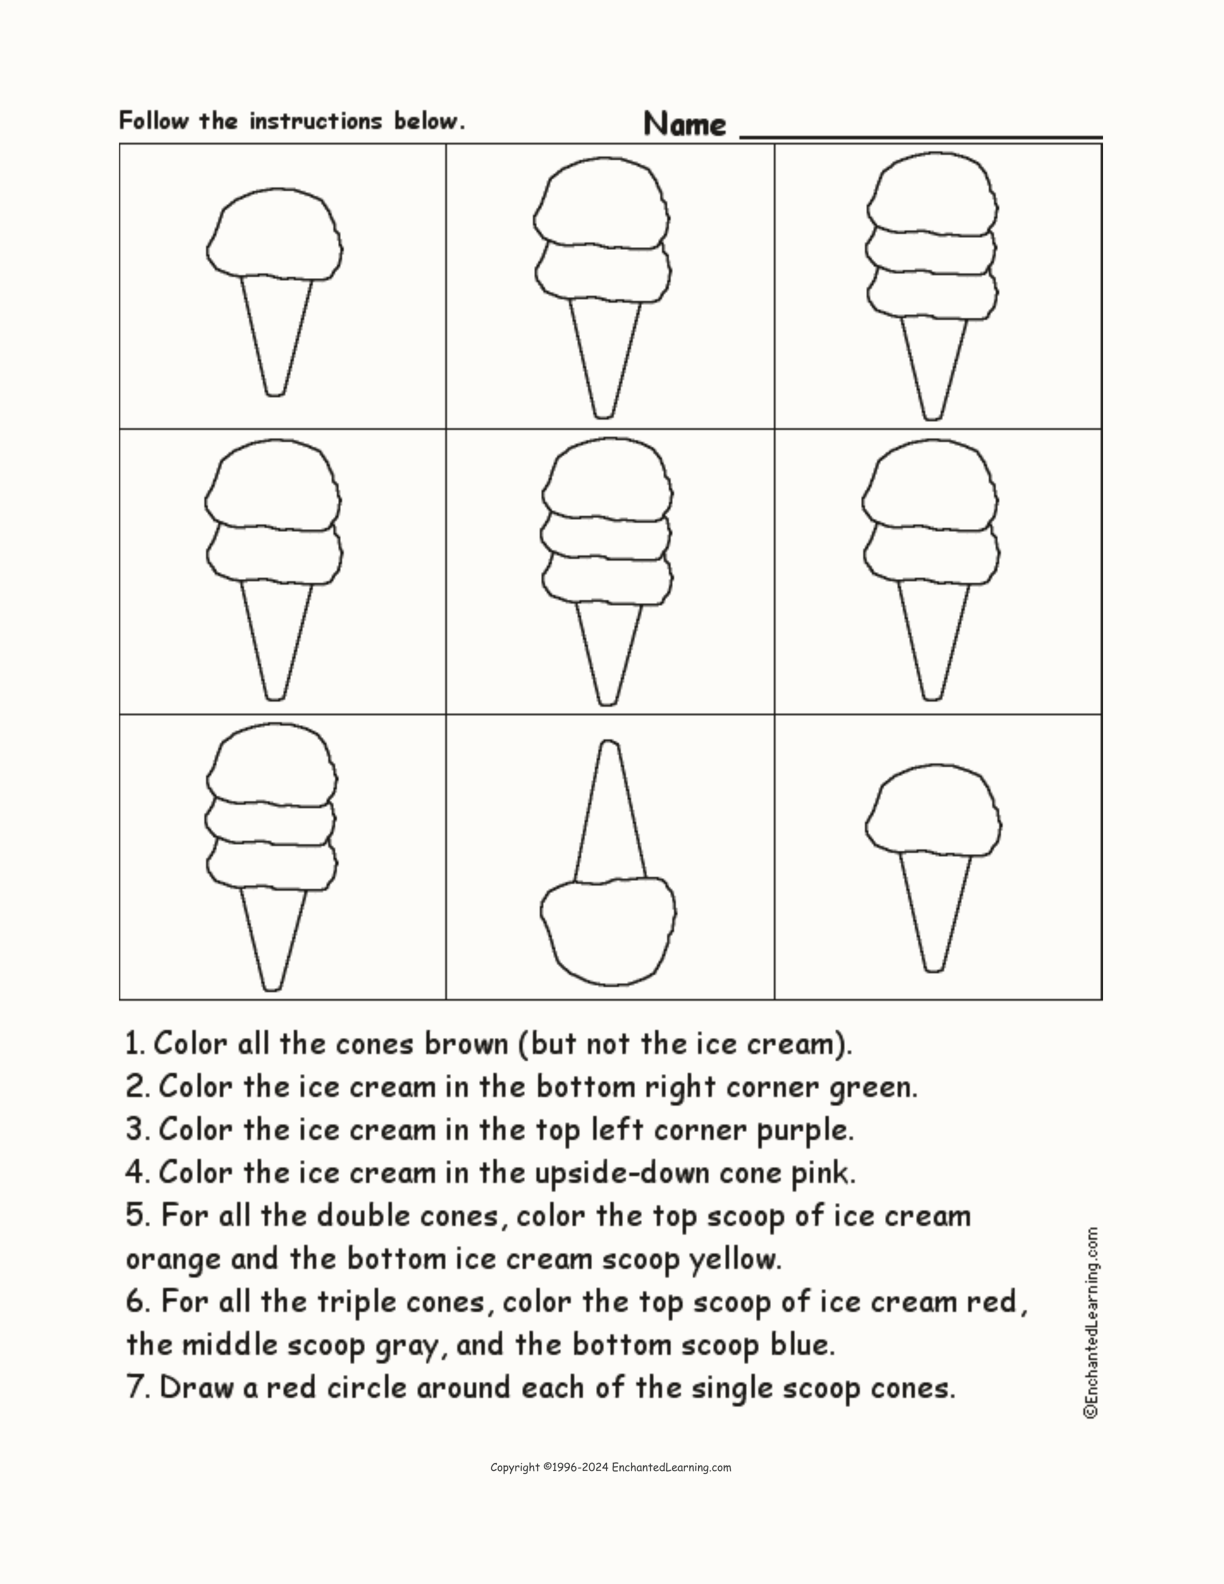 Ice Cream Cones: Follow the Instructions interactive worksheet page 1